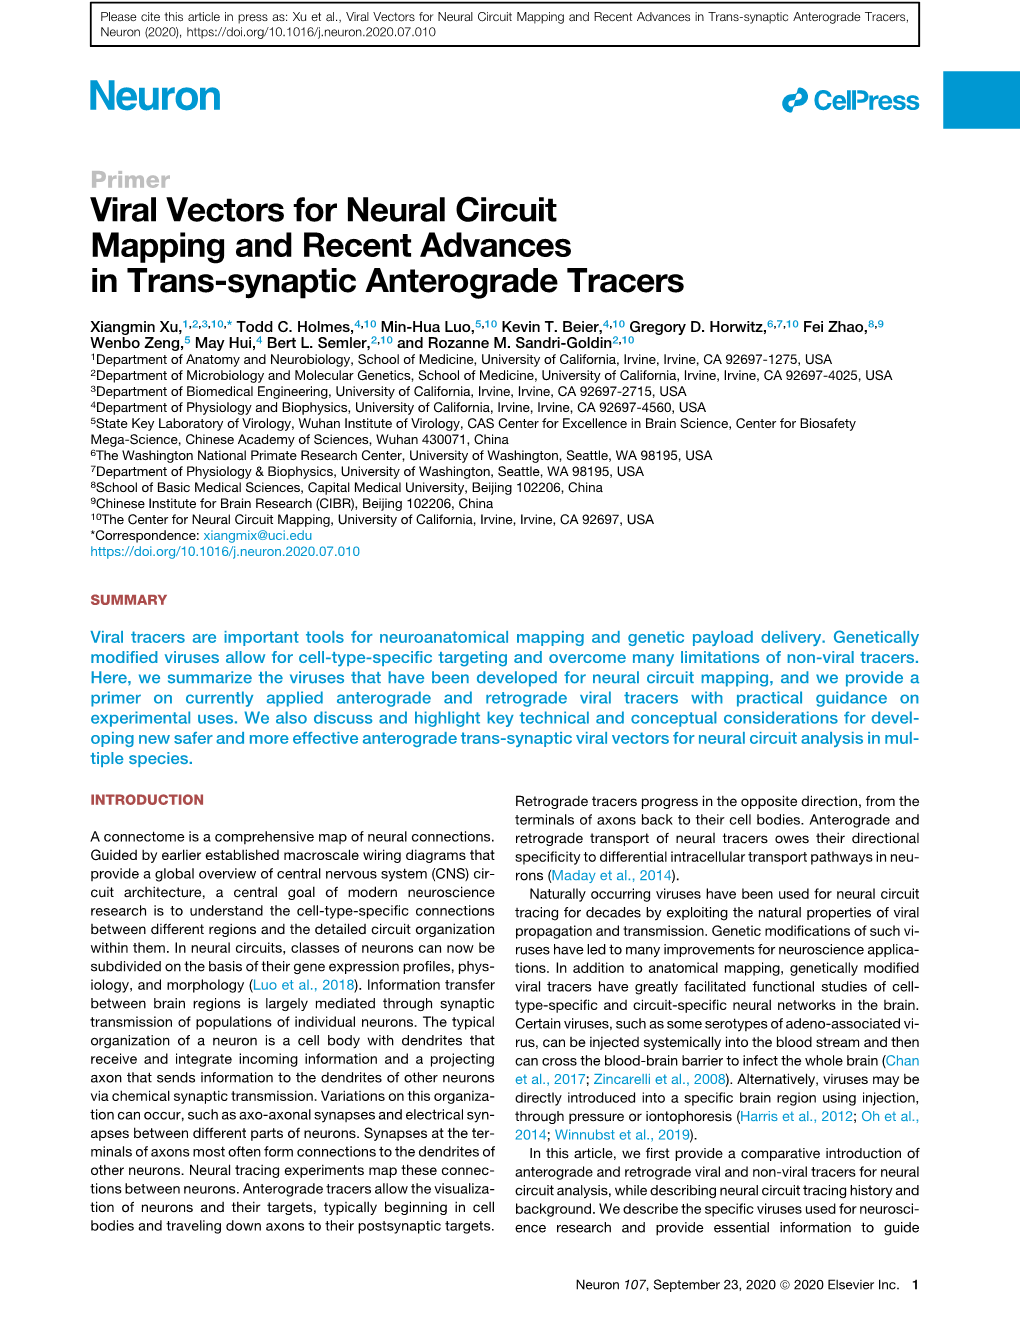 Viral Vectors for Neural Circuit Mapping and Recent Advances in Trans-Synaptic Anterograde Tracers, Neuron (2020)